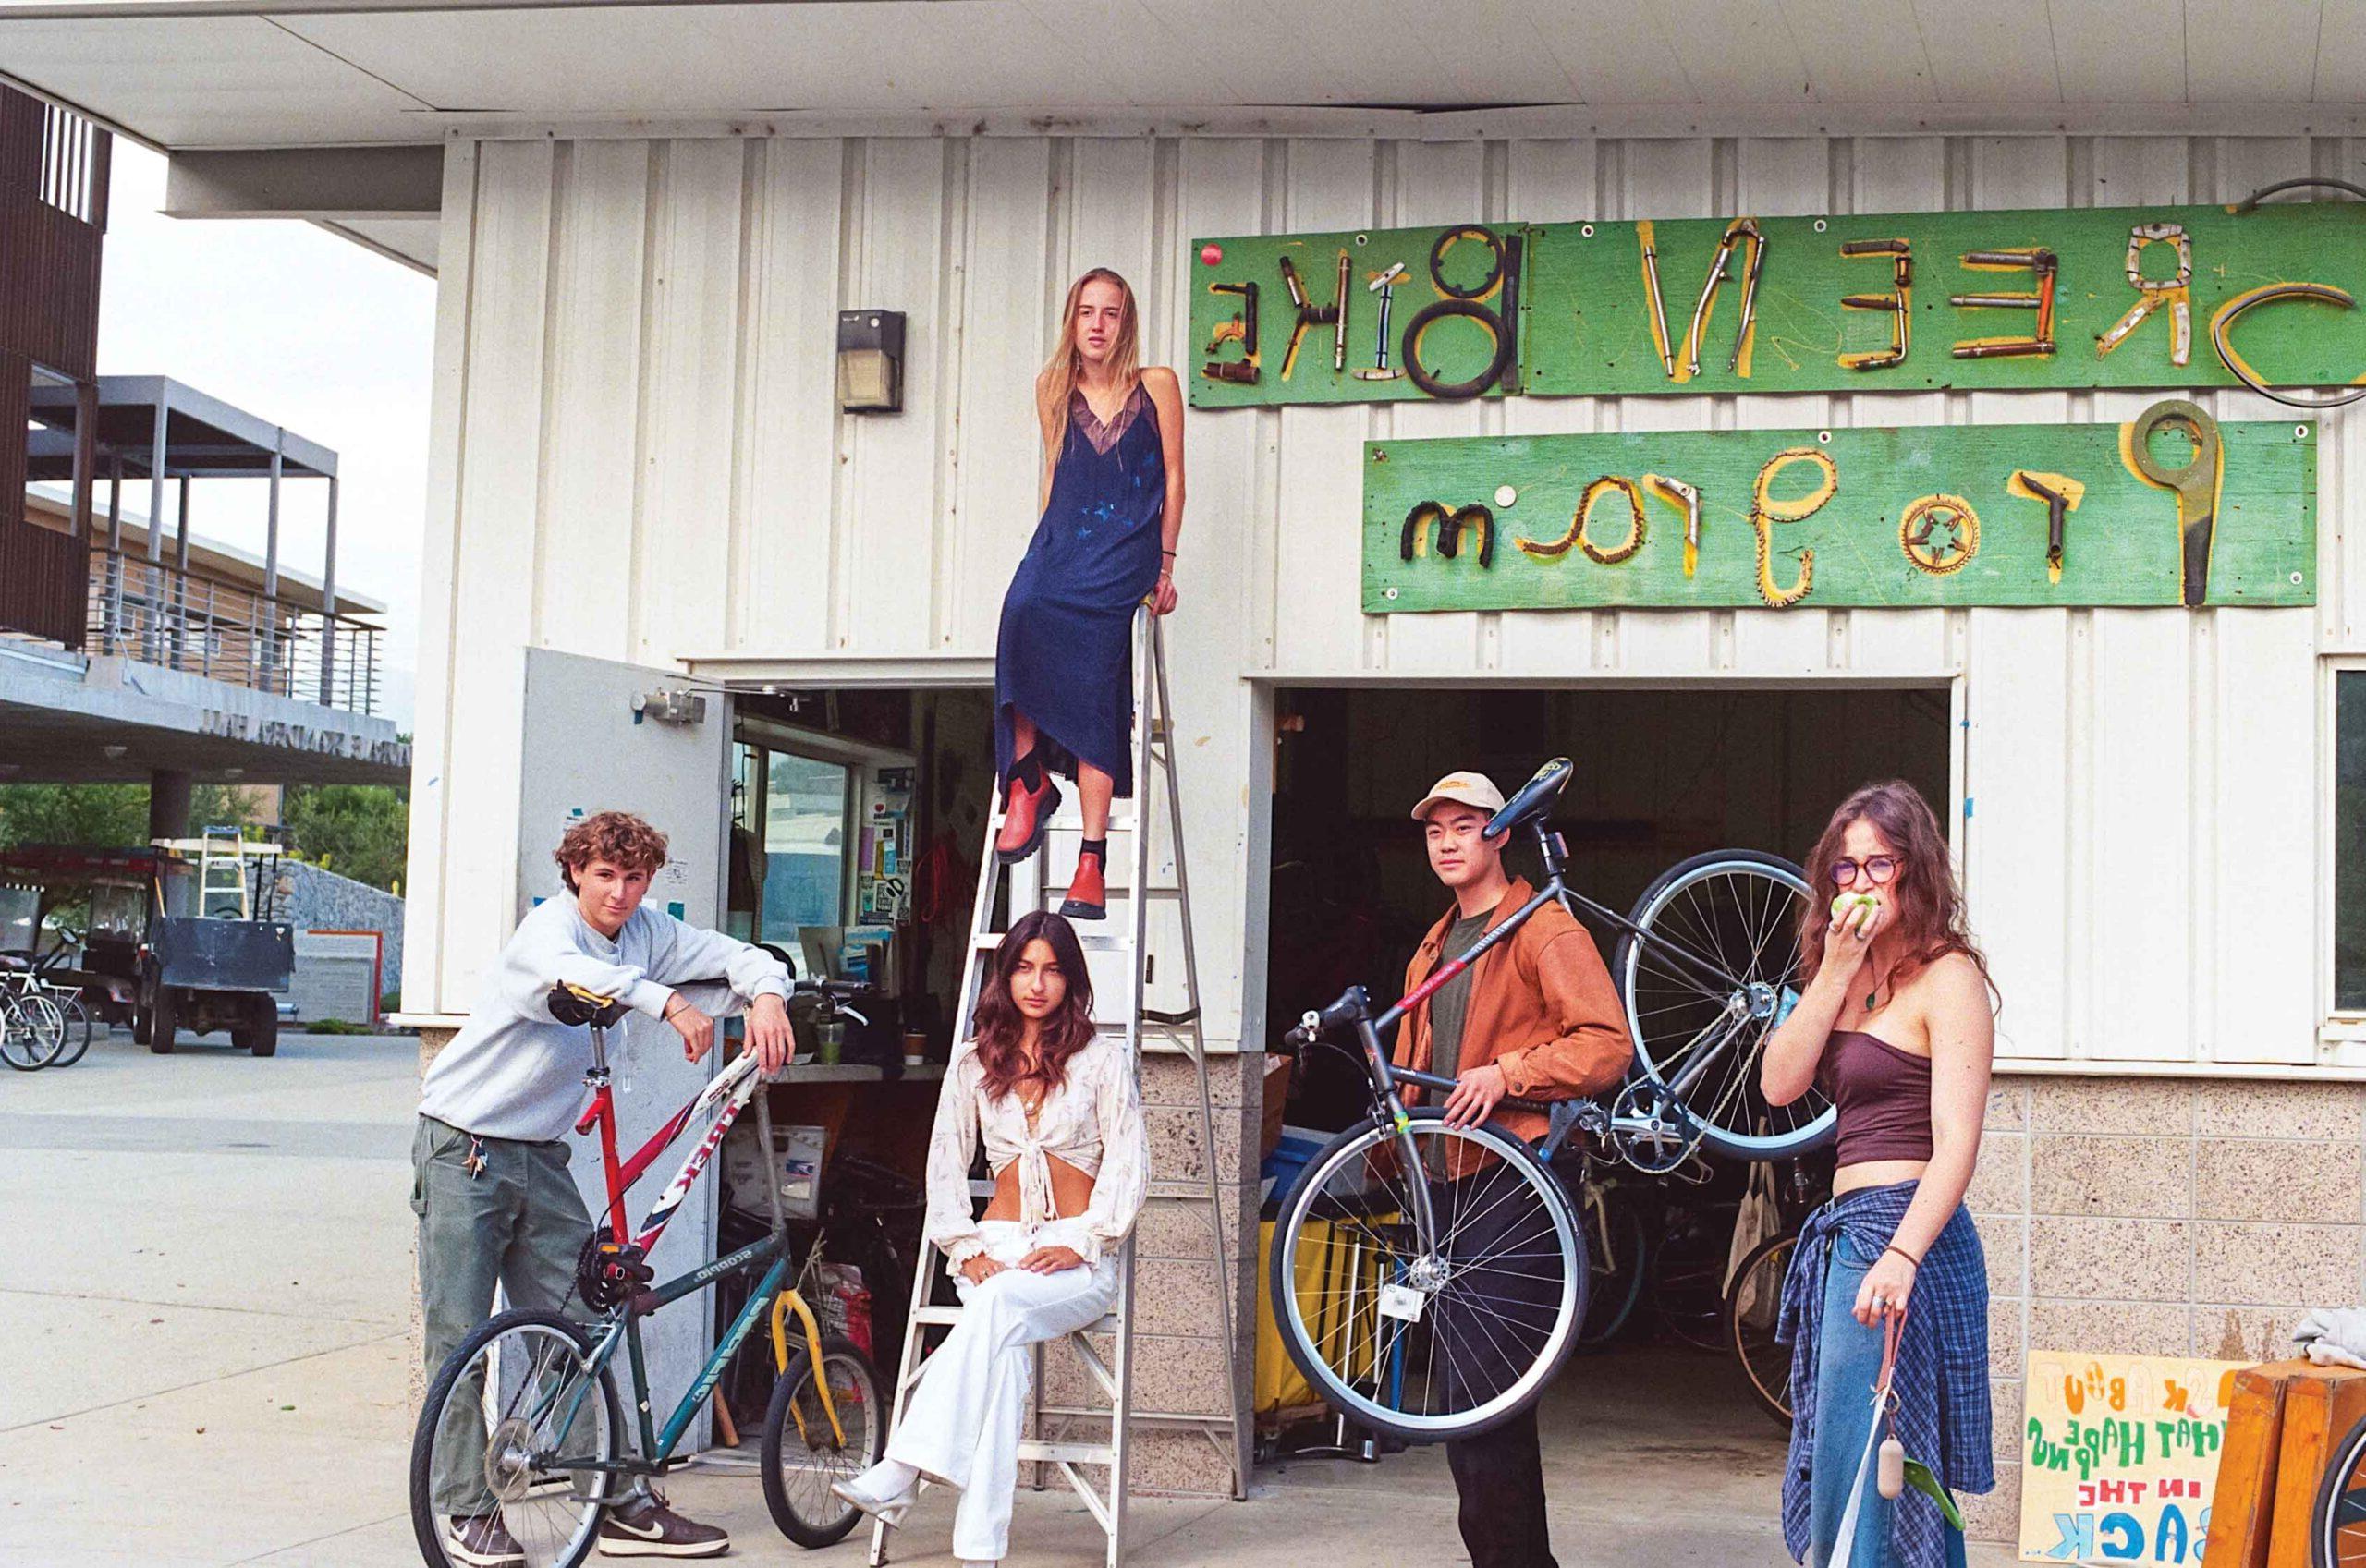 Pz thread members pose in front of the green bike program buildng.